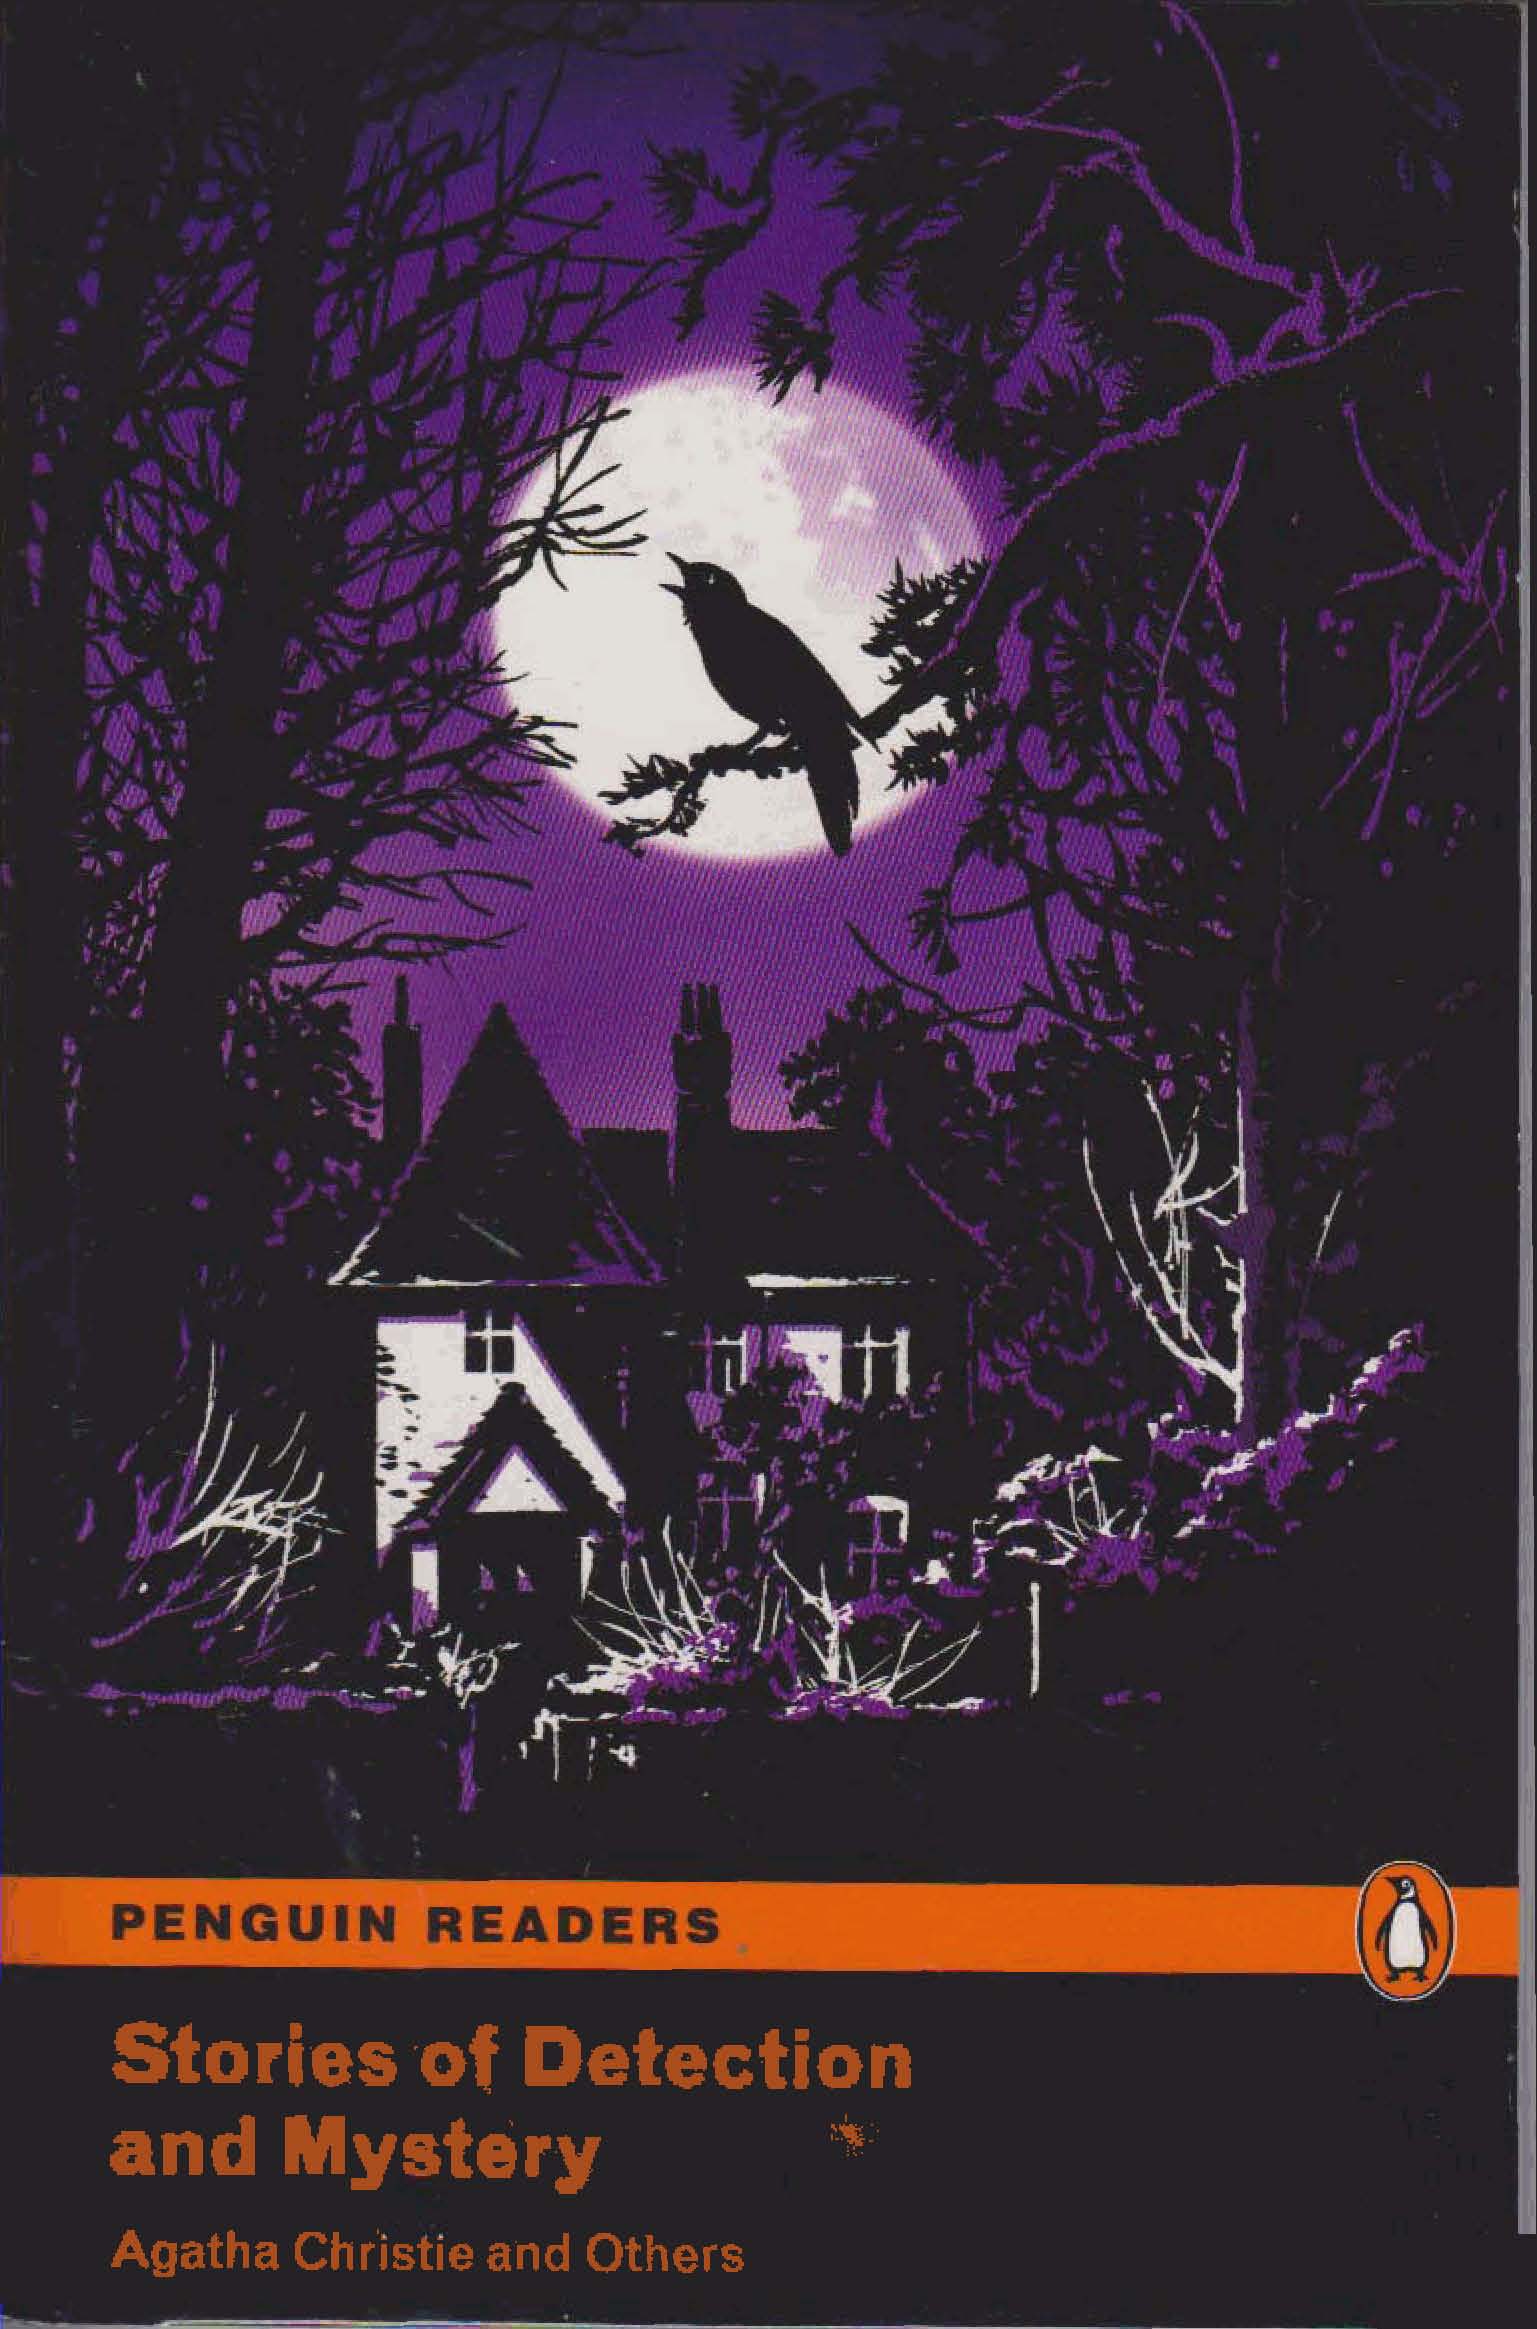 STORIES OF DETECTION AND MYSTERY (PENGUIN READERS, LEVEL 5) Book 